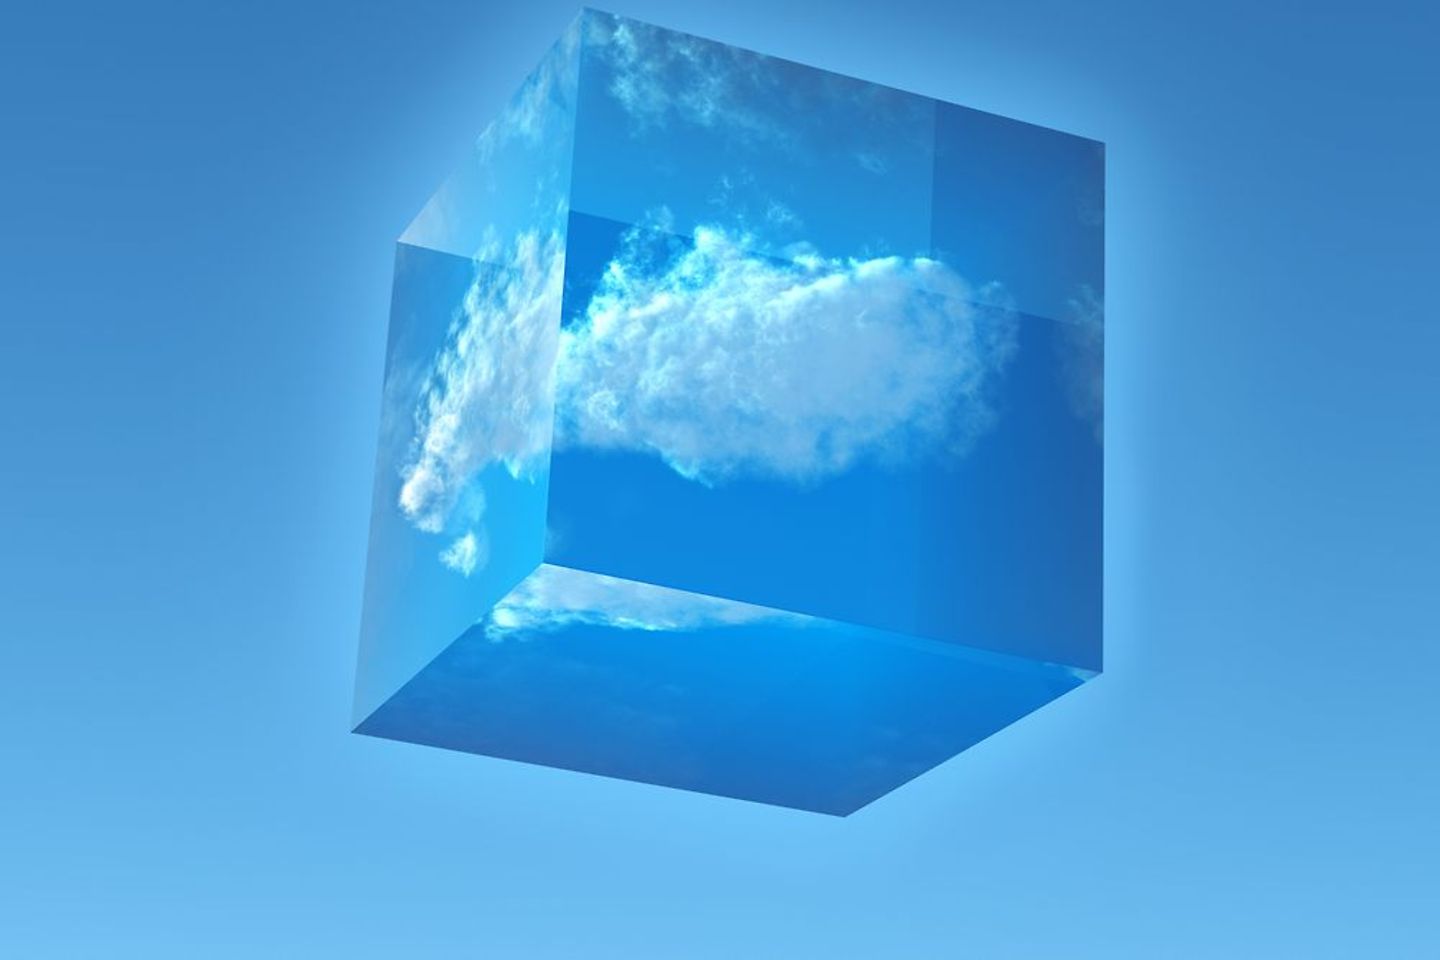 Transparent Cube with a Cloud inside